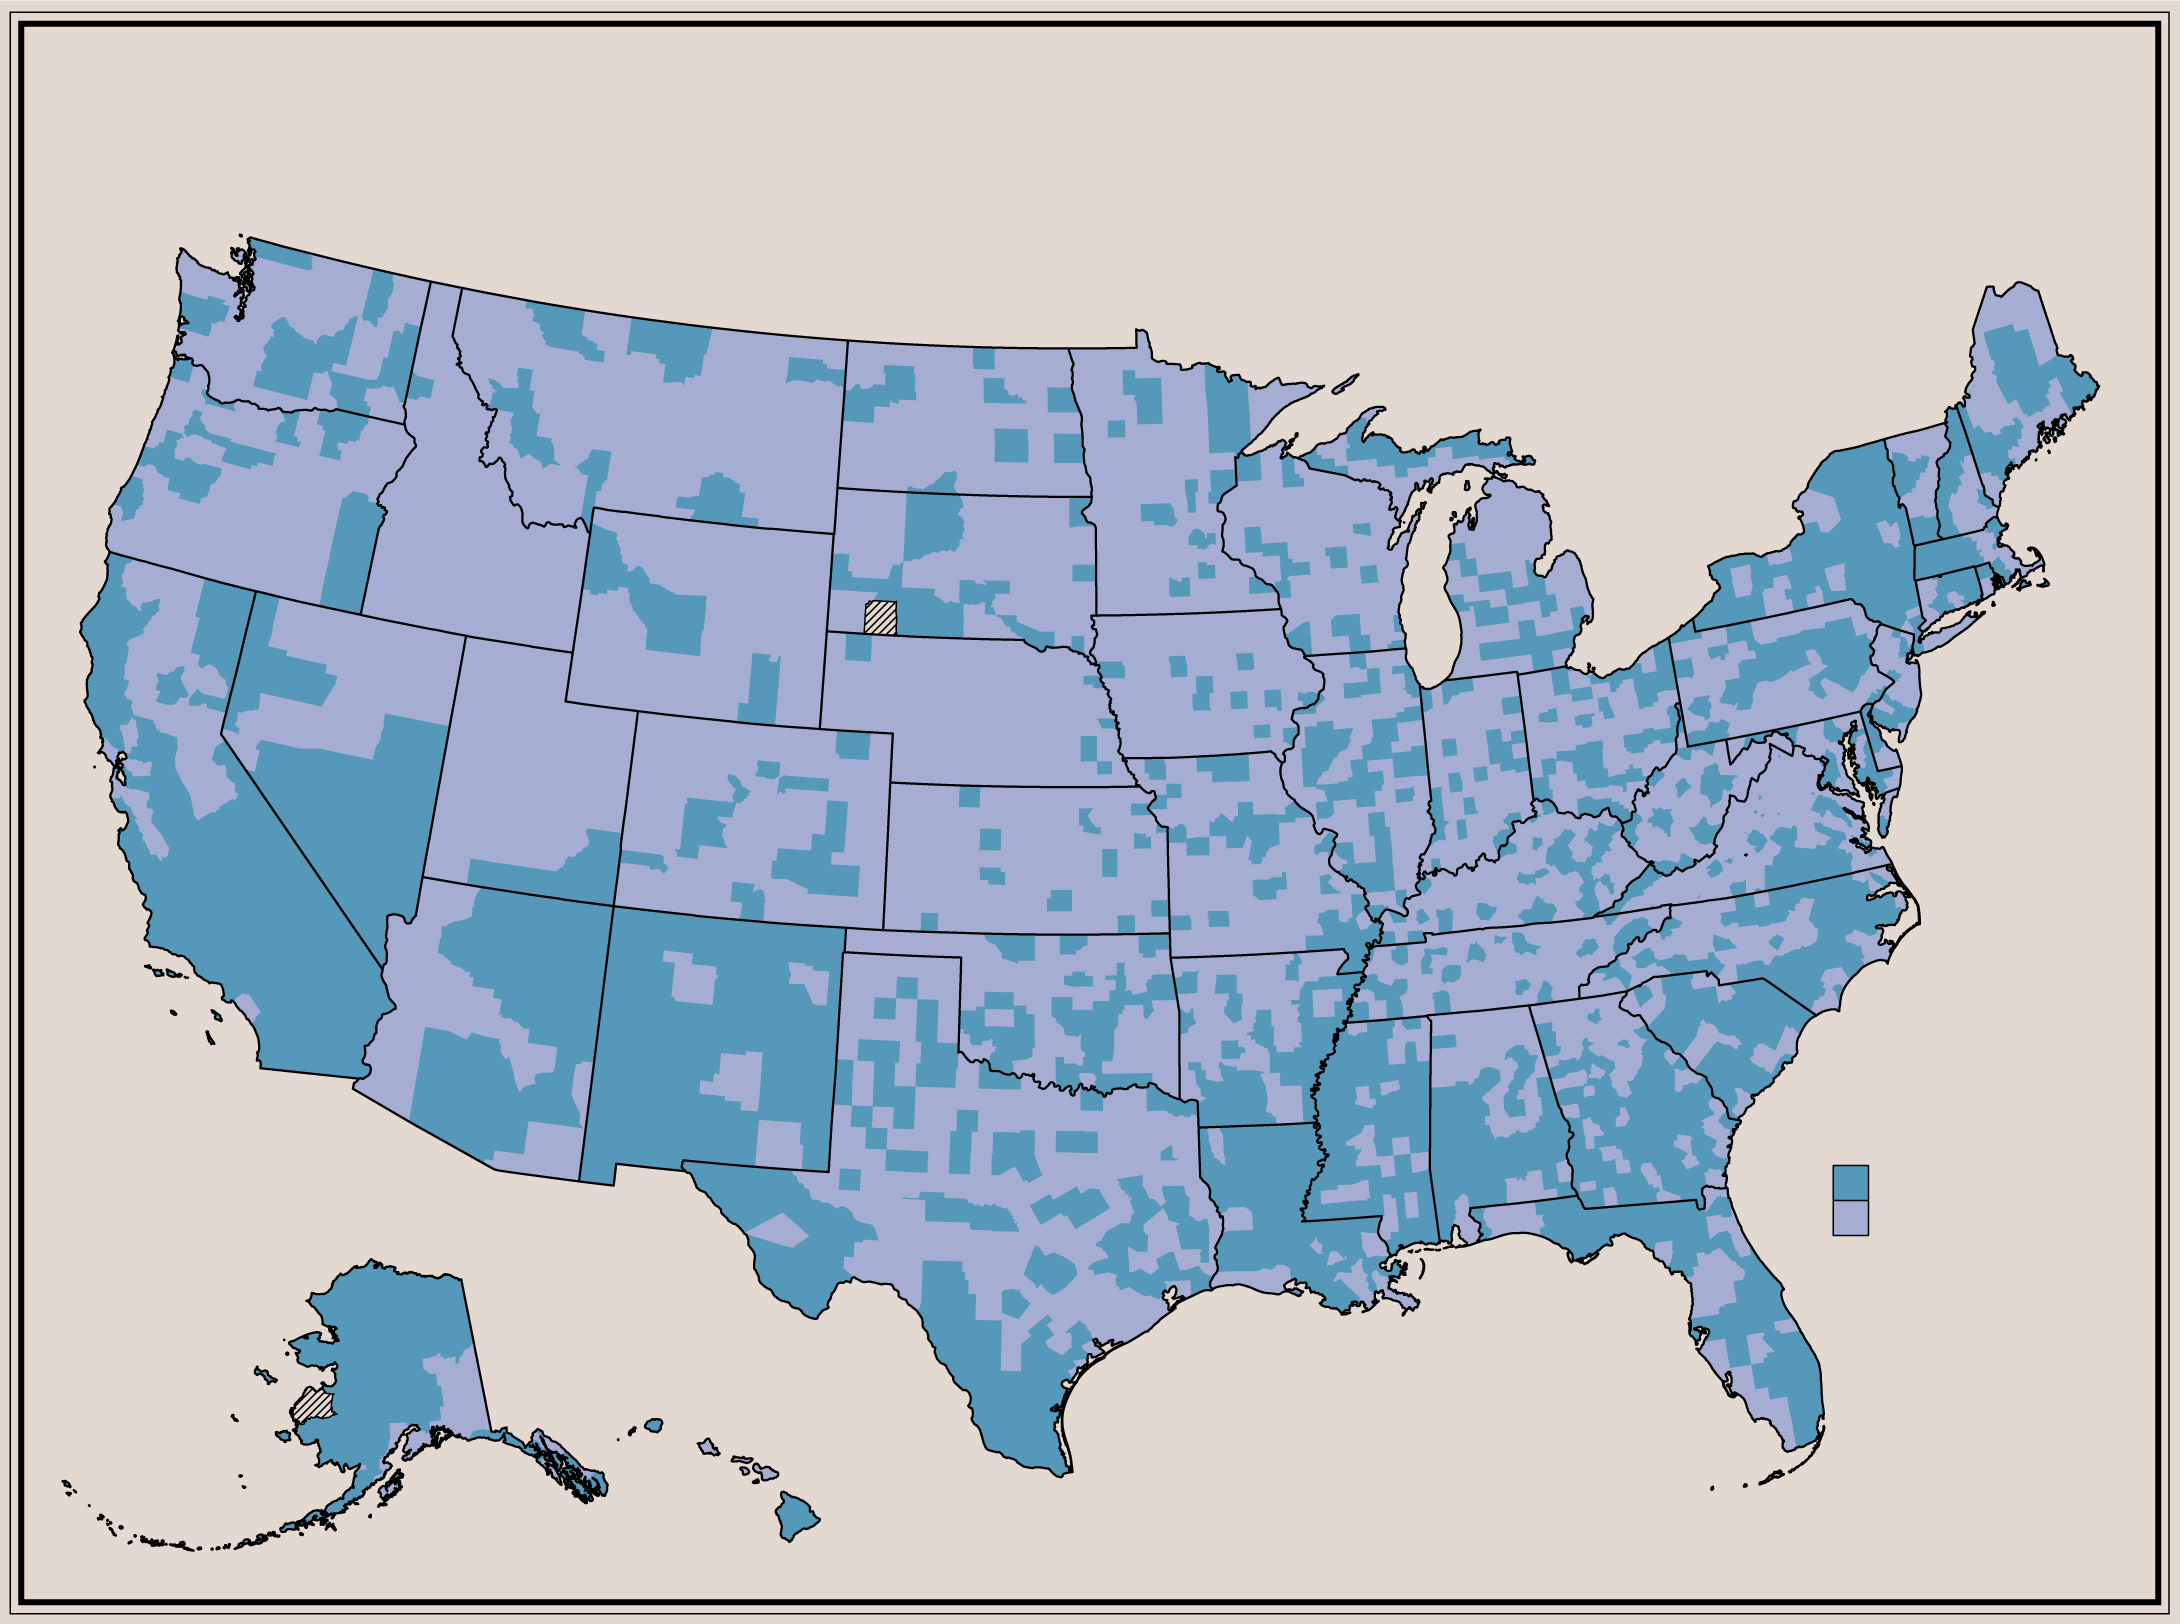 Choropleth map that indicates where people in the United States are married or not married with a high prevalence of marriage in the center of the US.